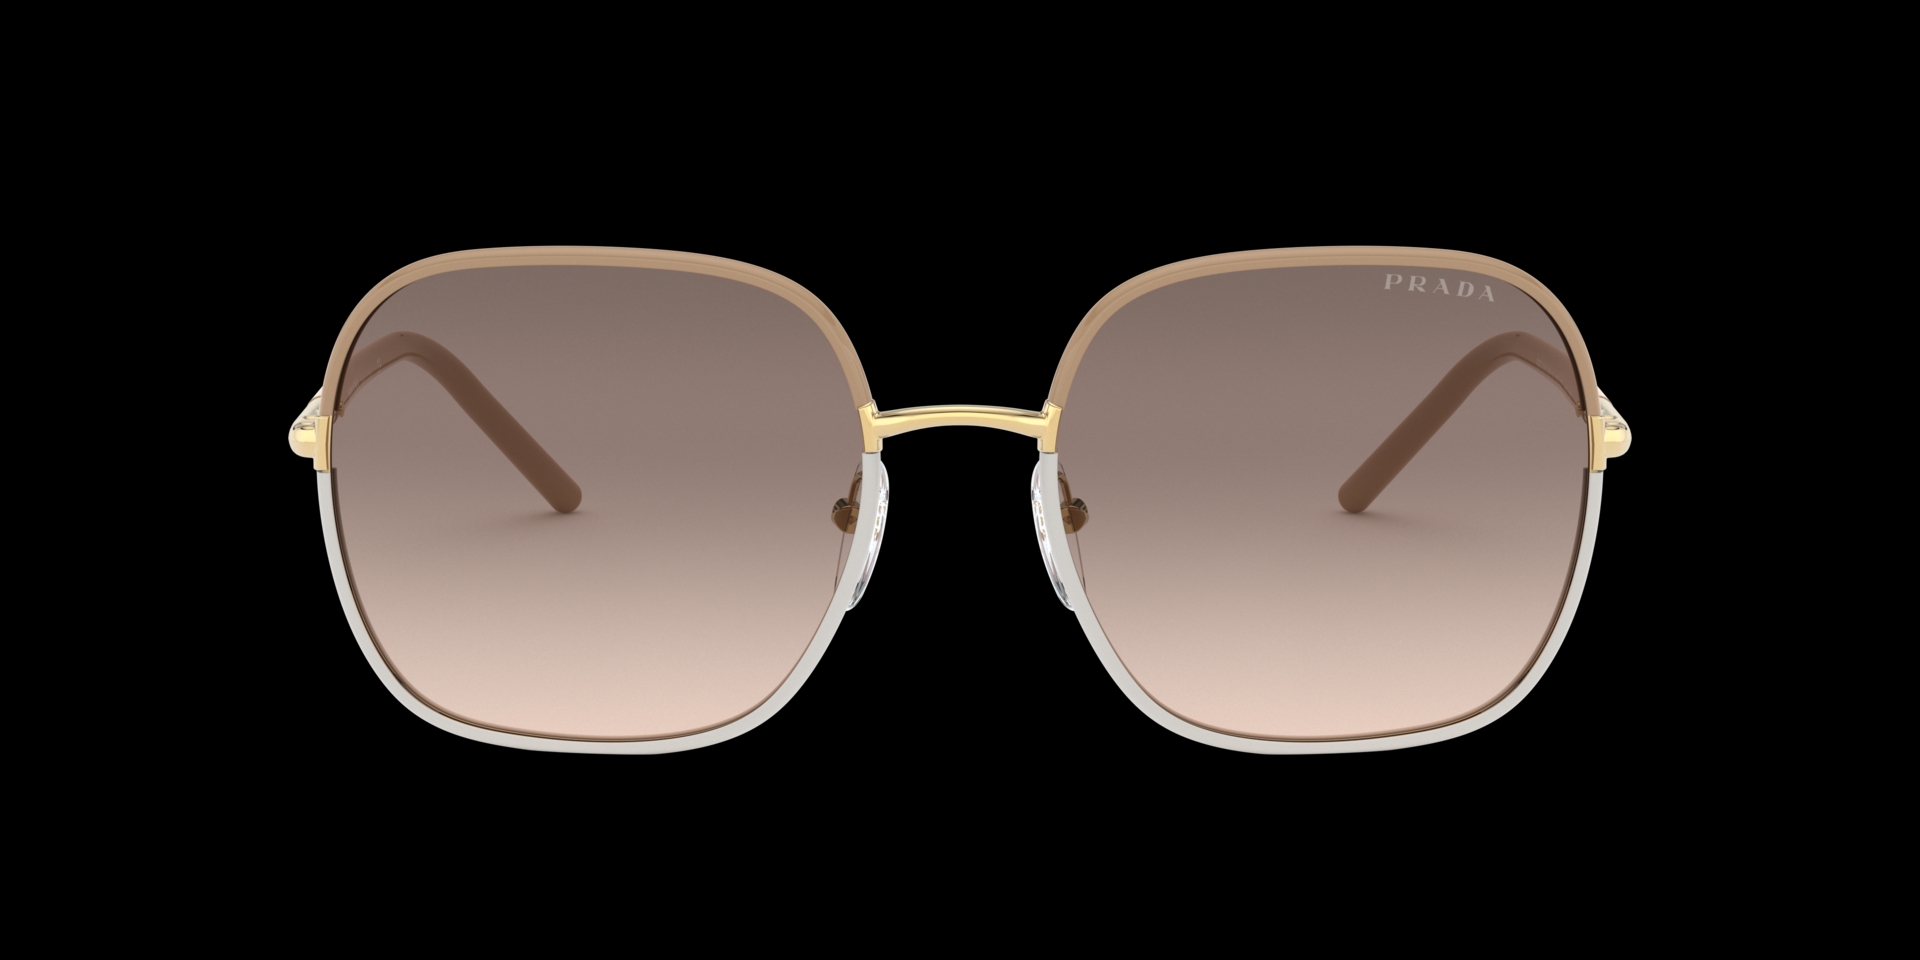 The viral Prada sunglasses are 55% off on Amazon — just $189